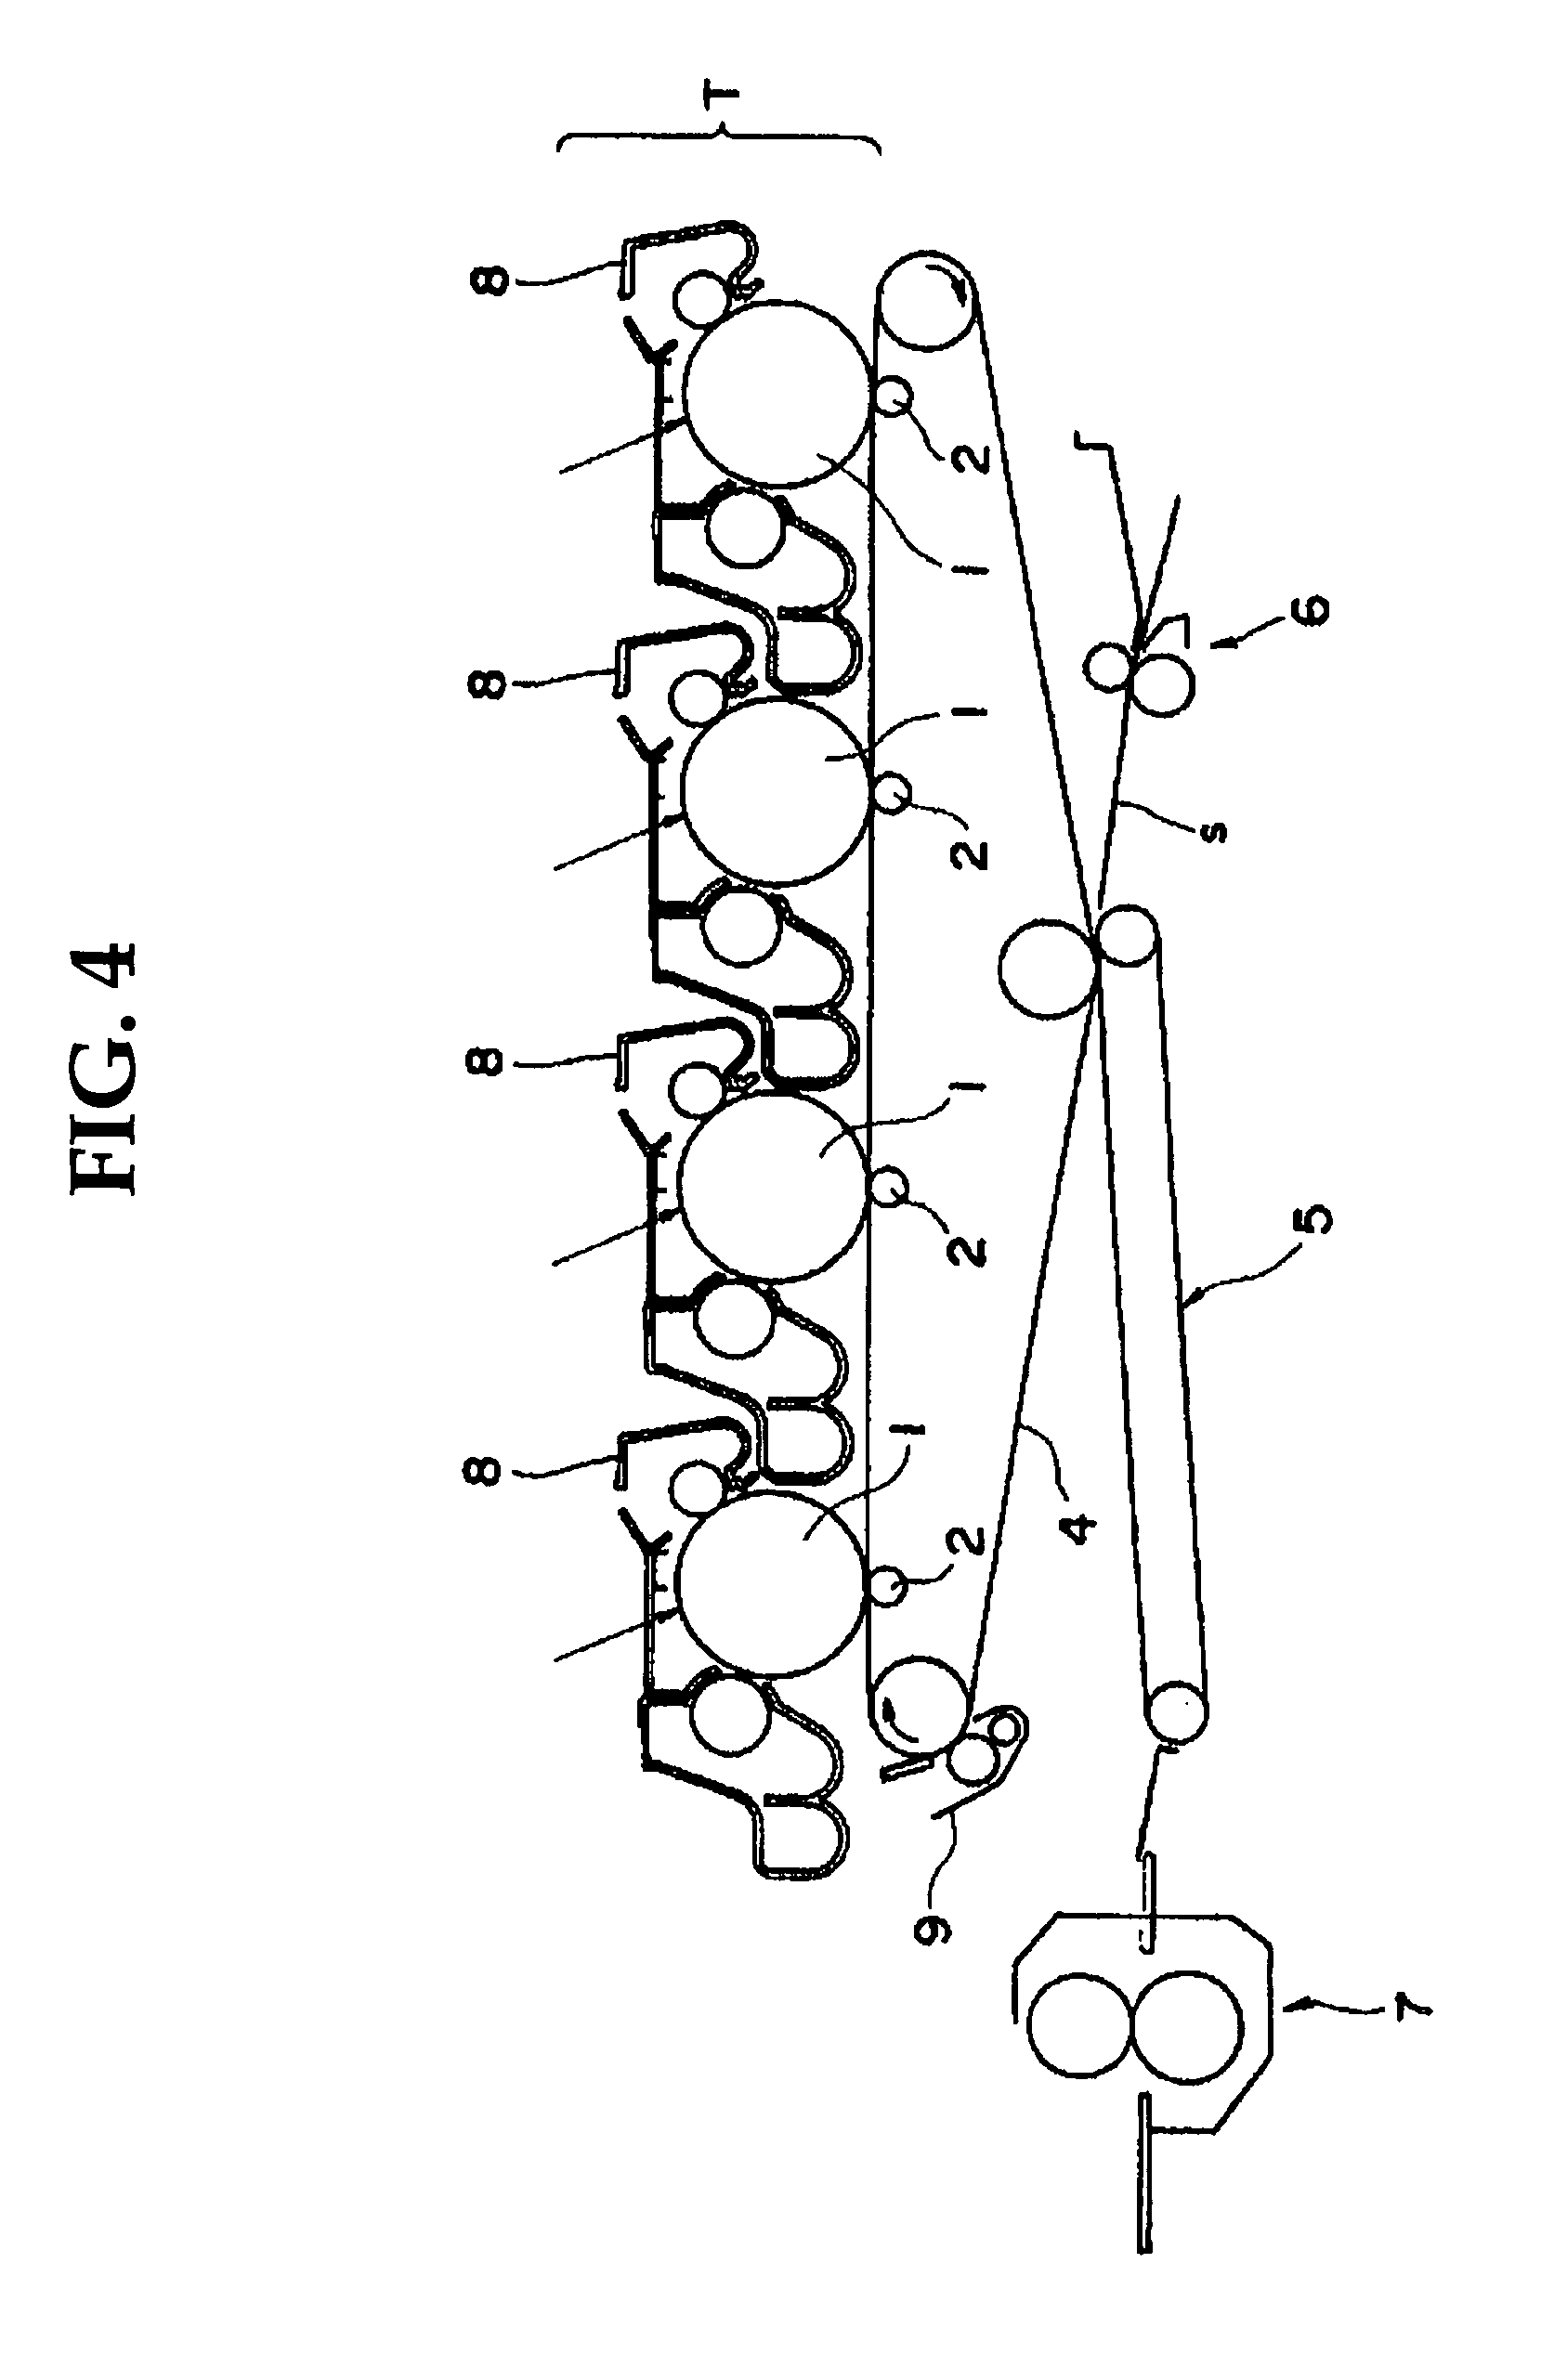 Toner for developing electrostatic image, developer, image forming apparatus, process for forming image, process cartridge and process for measuring porosity of toner